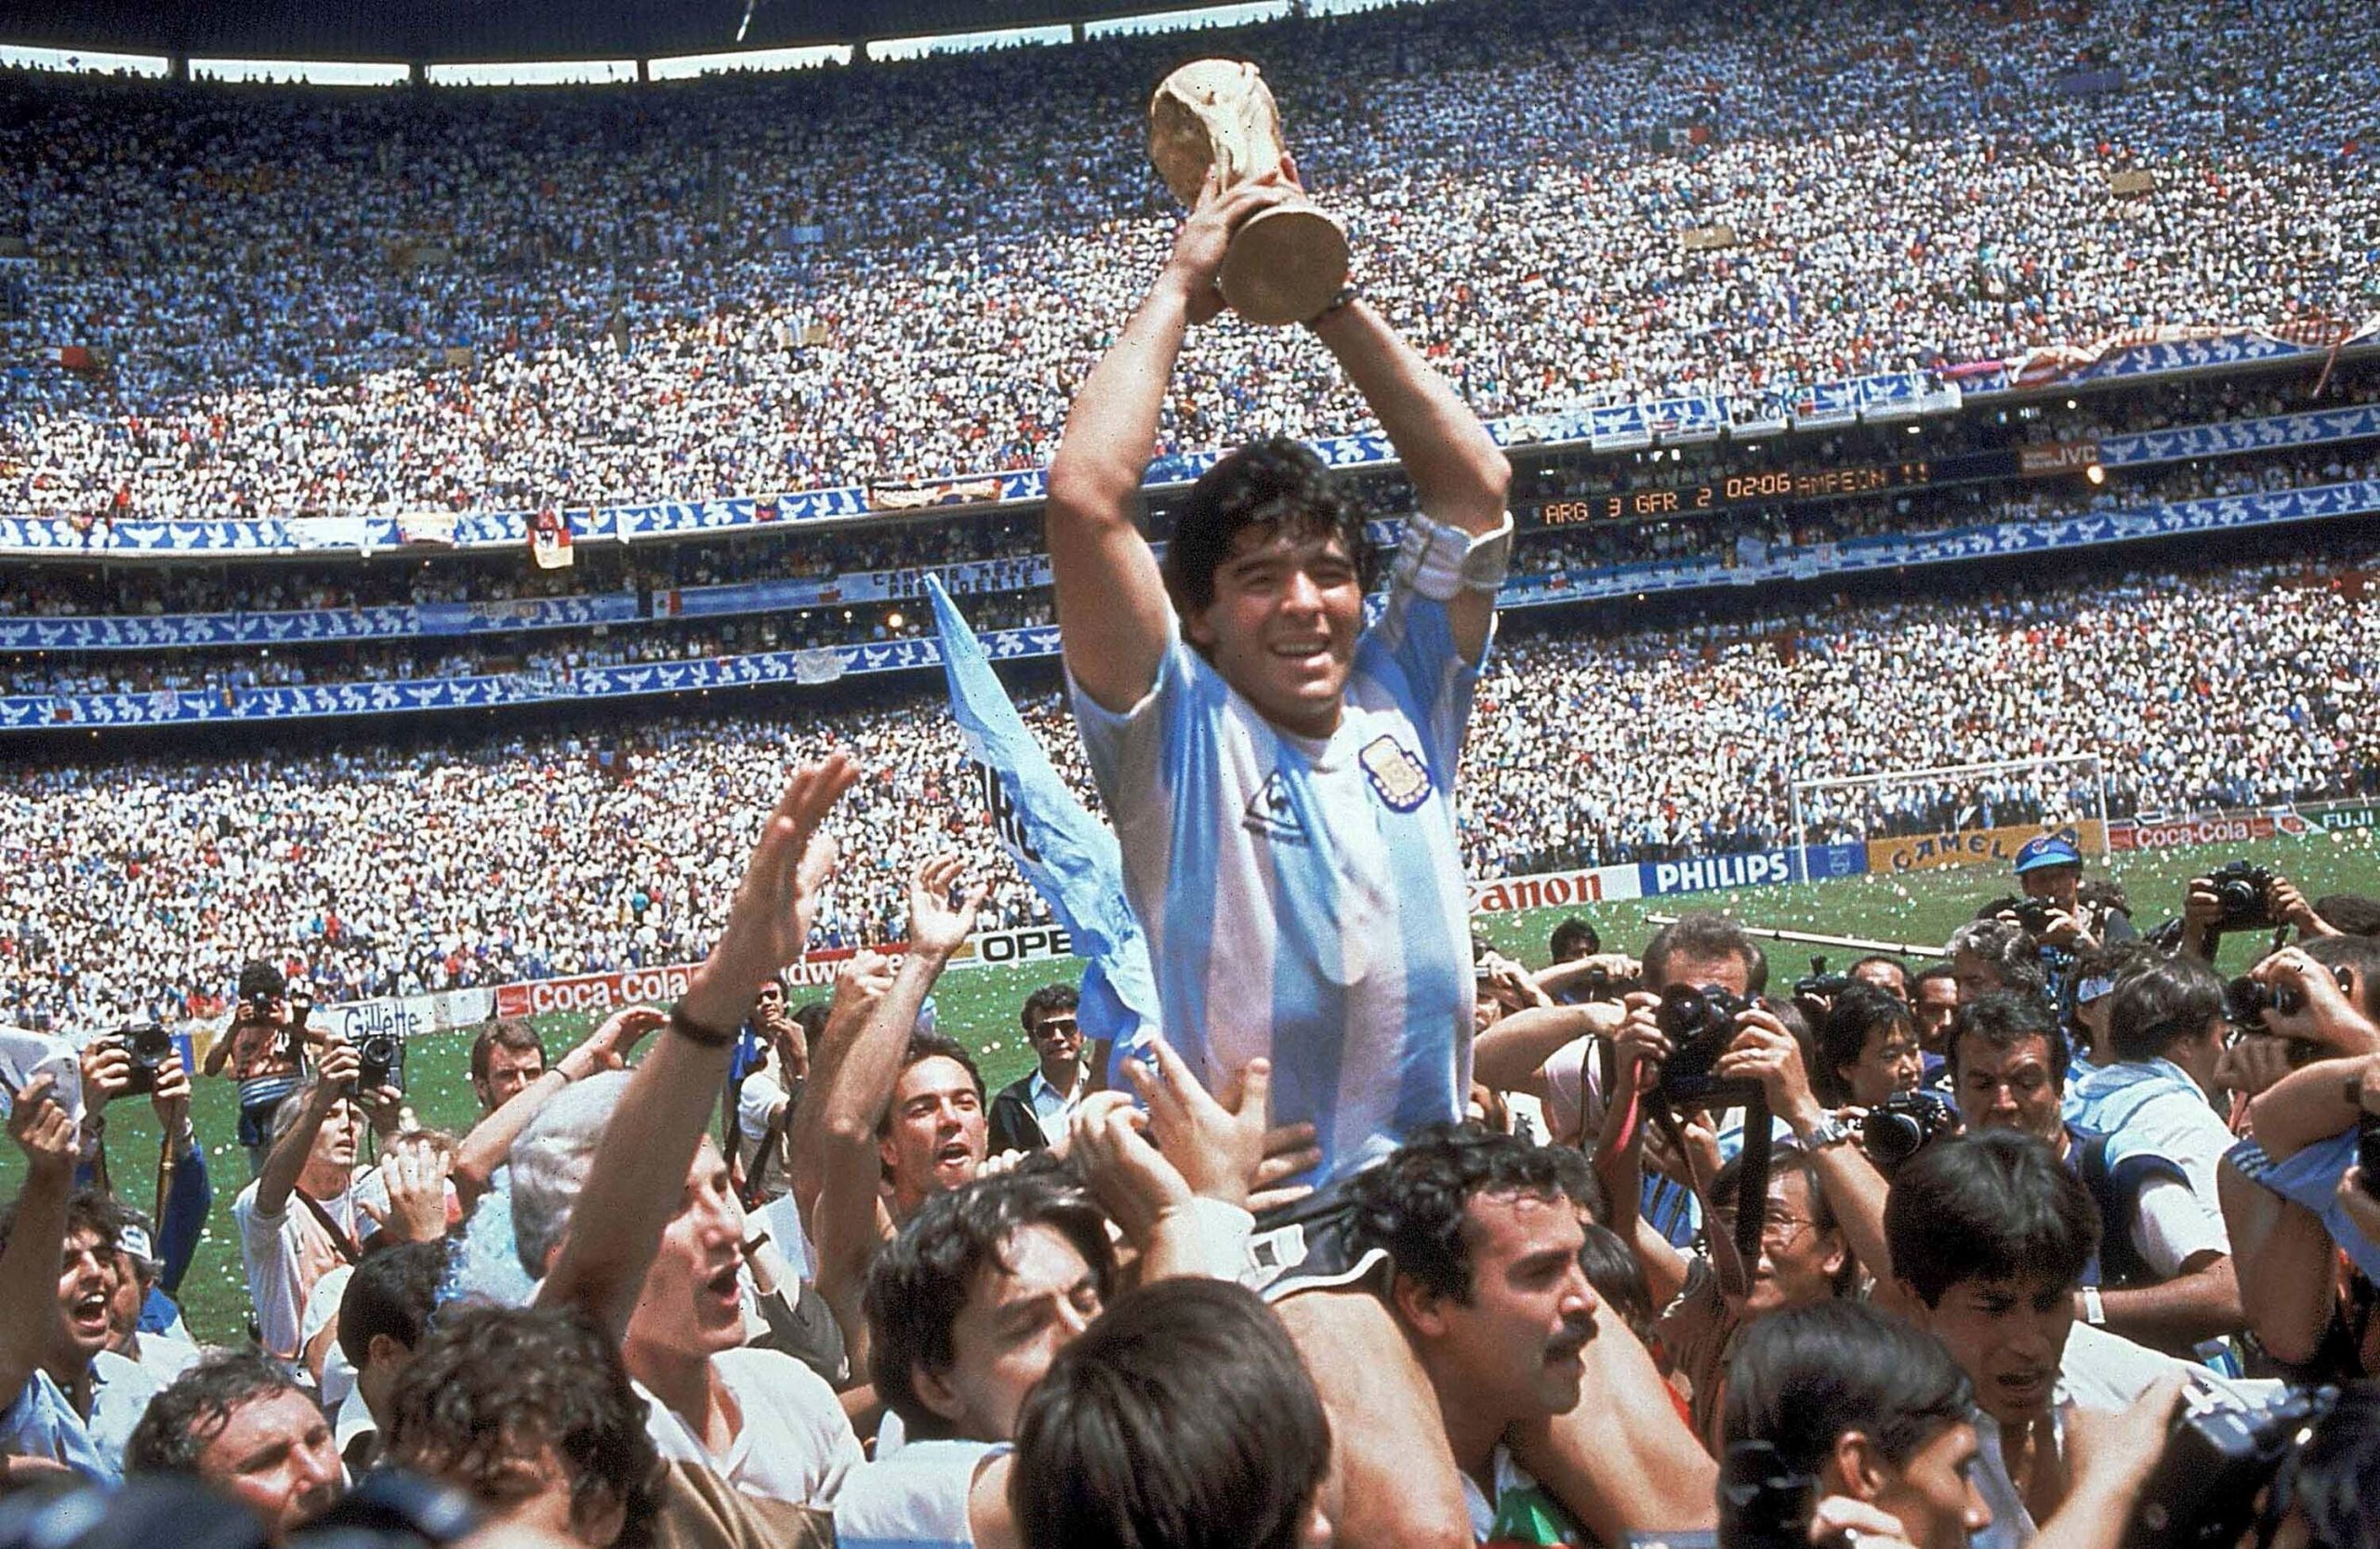 Diego Maradona was left to ‘fate’ ahead of death: Expert panel